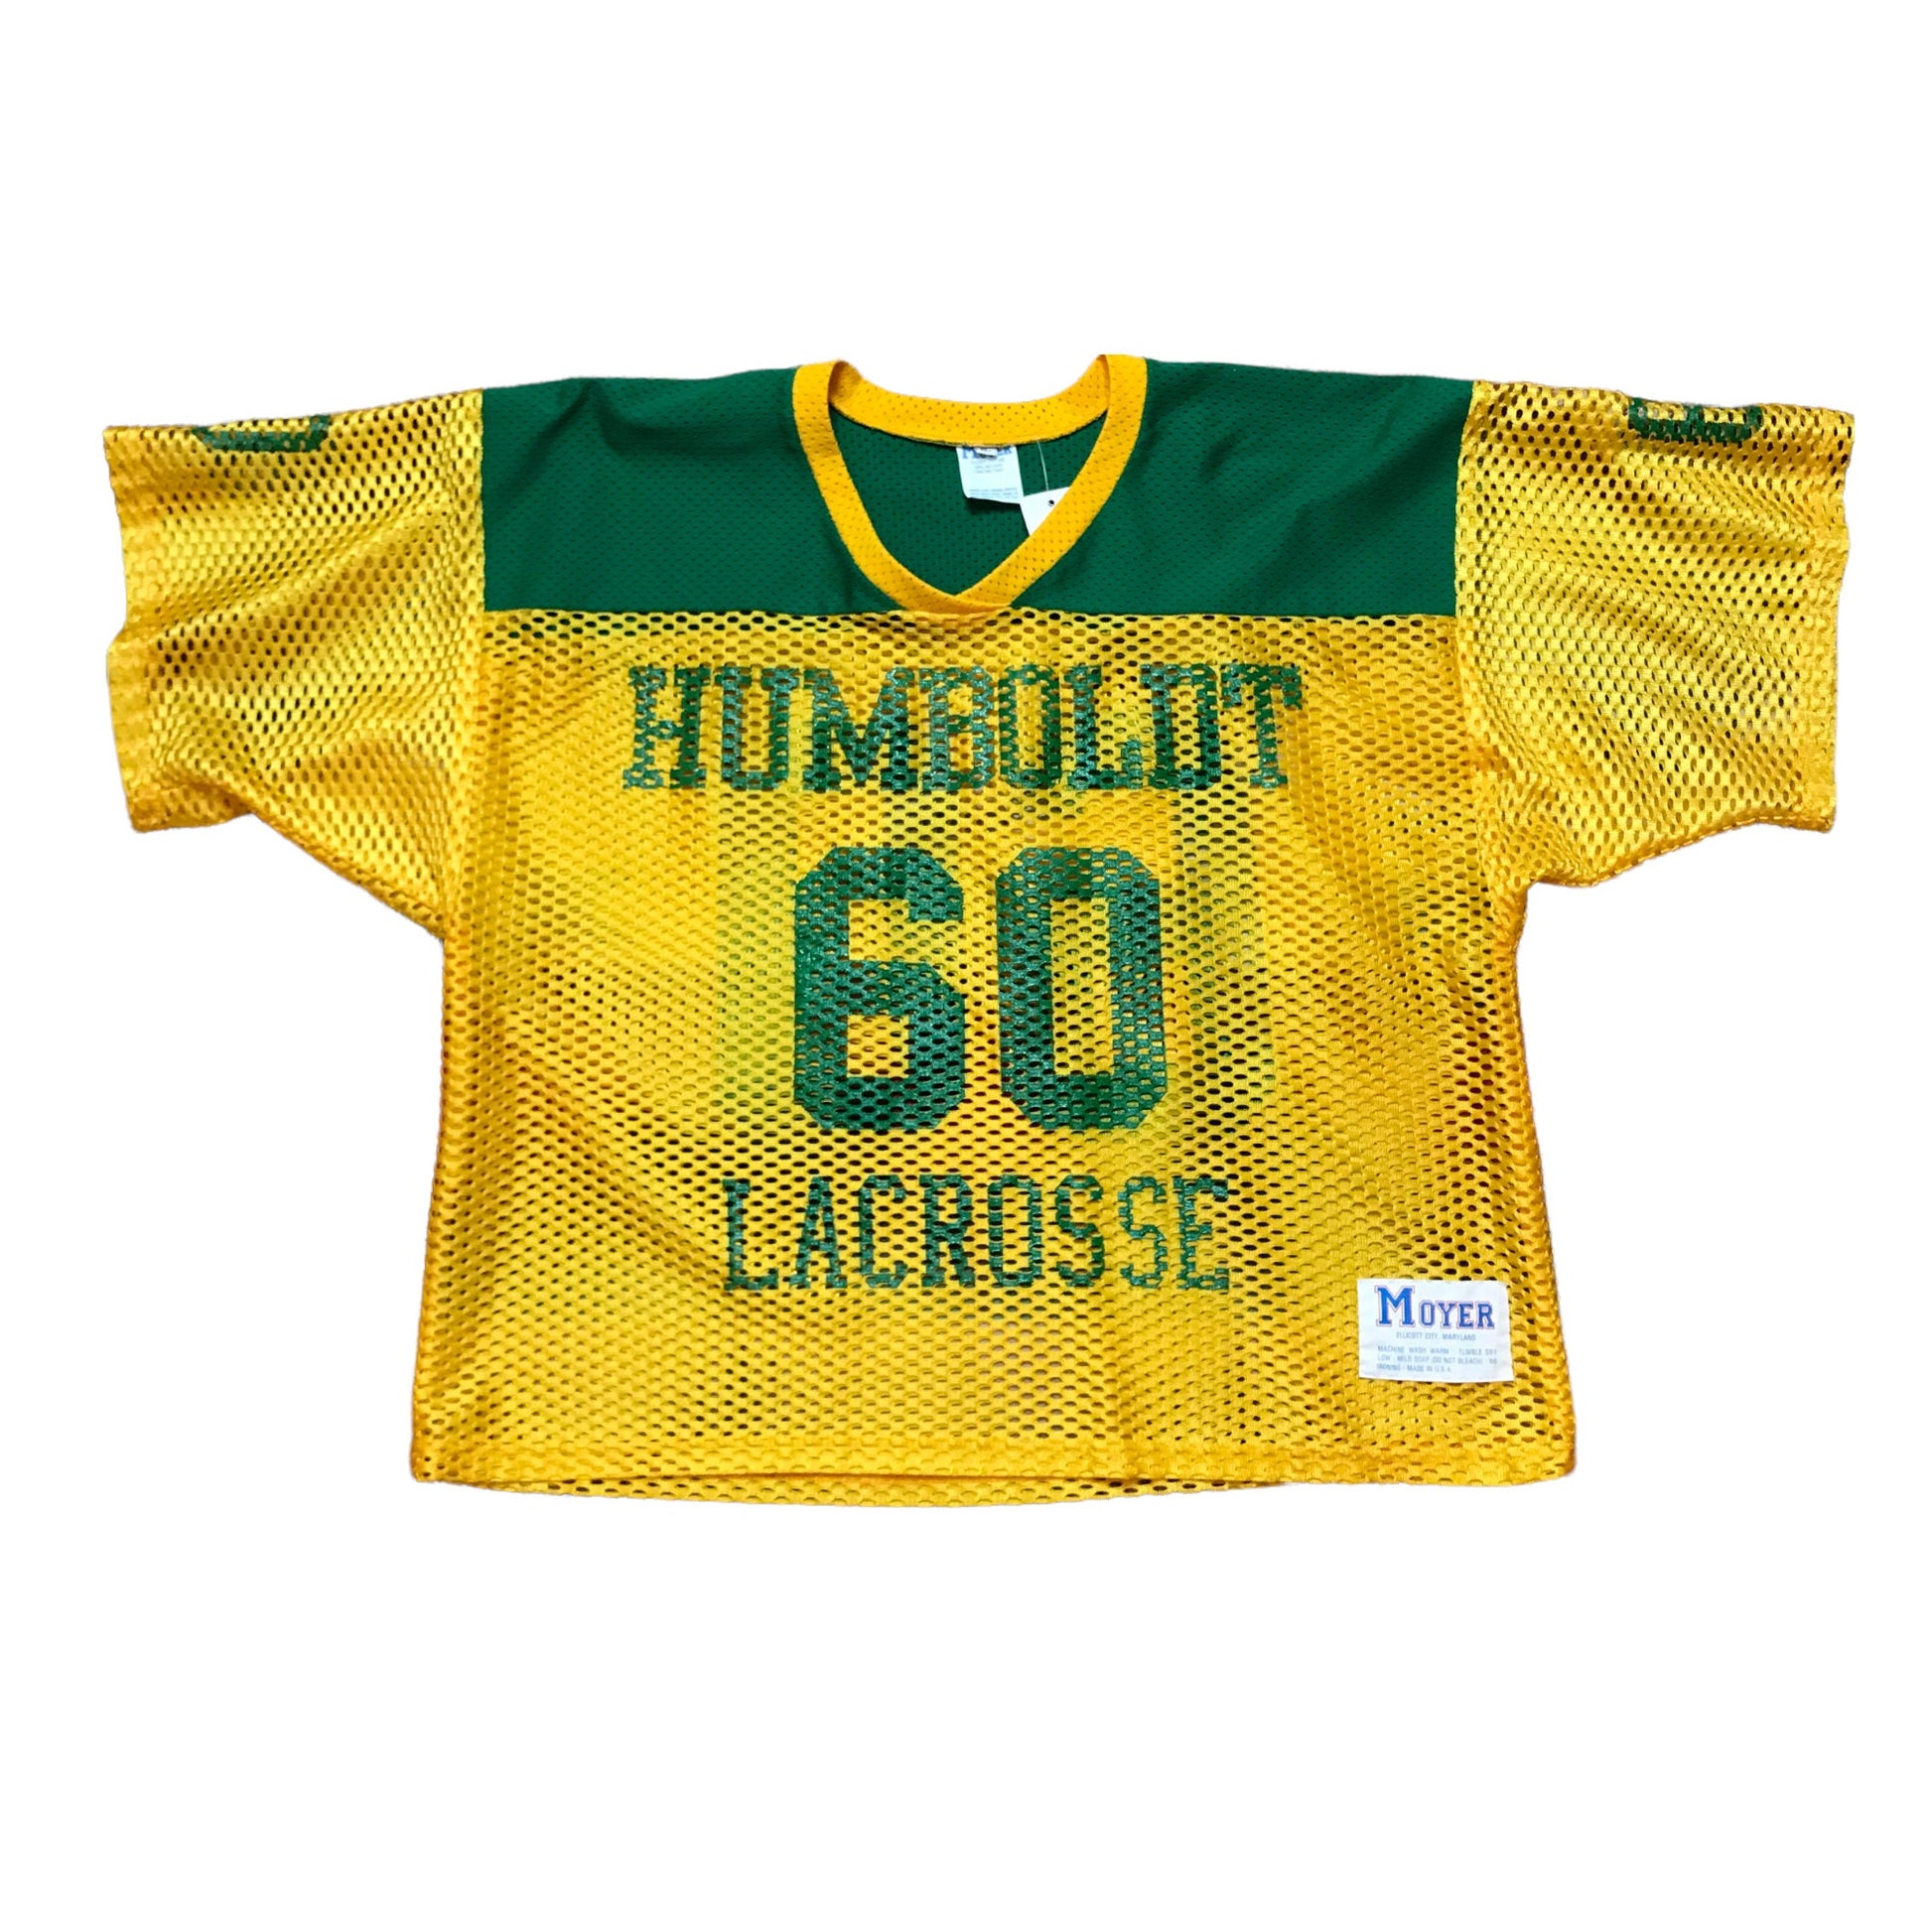 1990s Humboldt Lacrosse Cropped Mesh Jersey Made in USA Size L/XL